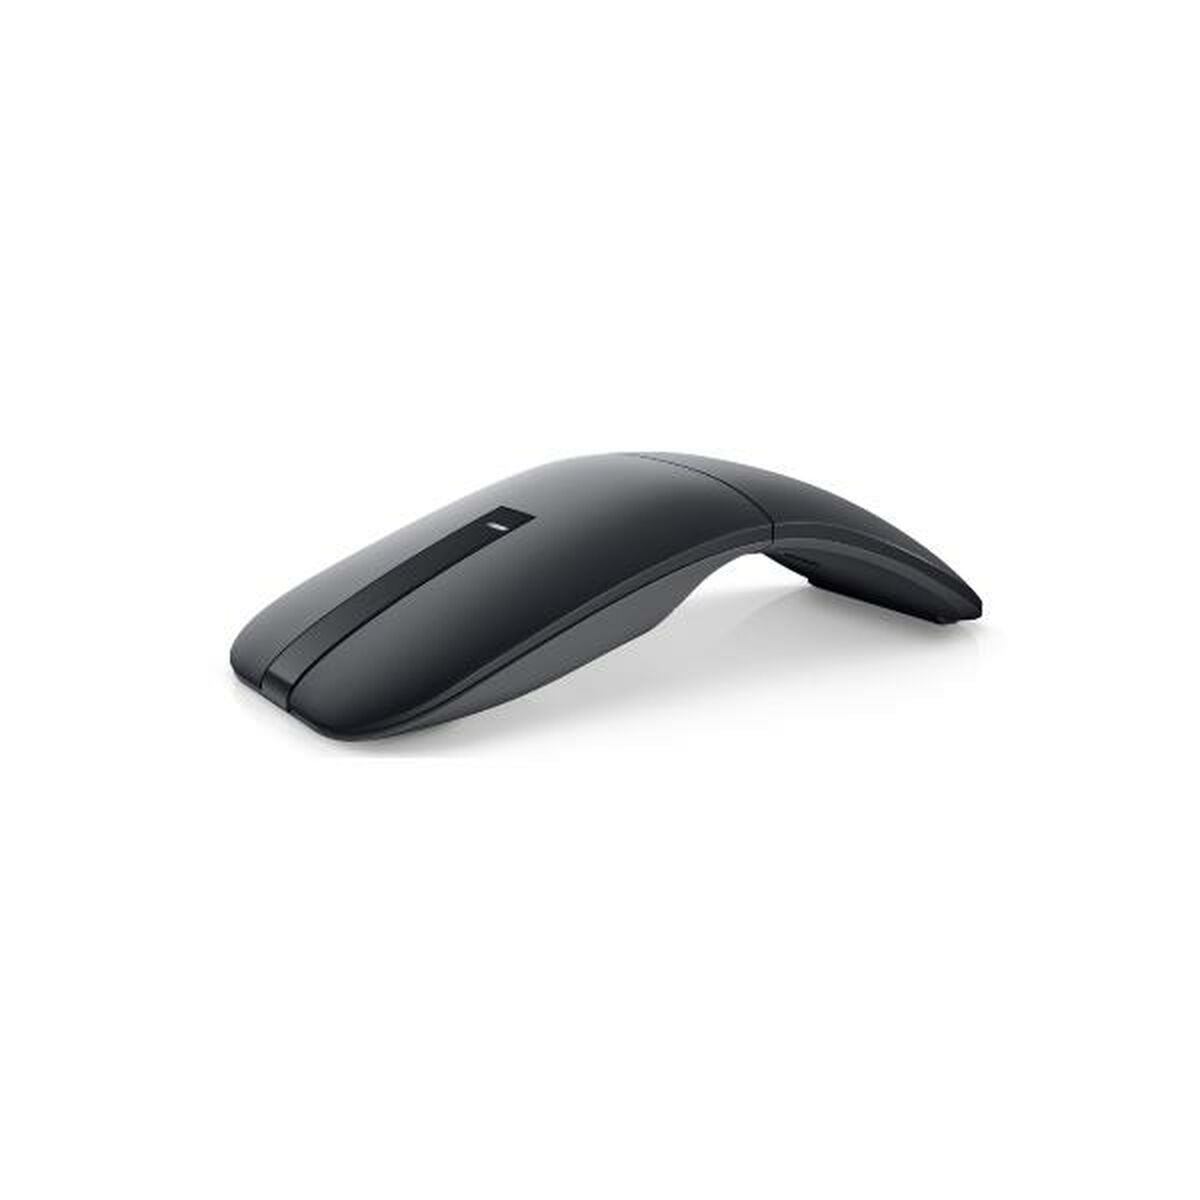 Mouse Dell MS700-BK-R-EU Grey, Dell, Computing, Accessories, mouse-dell-ms700-bk-r-eu-grey, Brand_Dell, category-reference-2609, category-reference-2642, category-reference-2656, category-reference-t-19685, category-reference-t-19908, category-reference-t-21353, category-reference-t-25626, computers / peripherals, Condition_NEW, office, Price_50 - 100, Teleworking, RiotNook